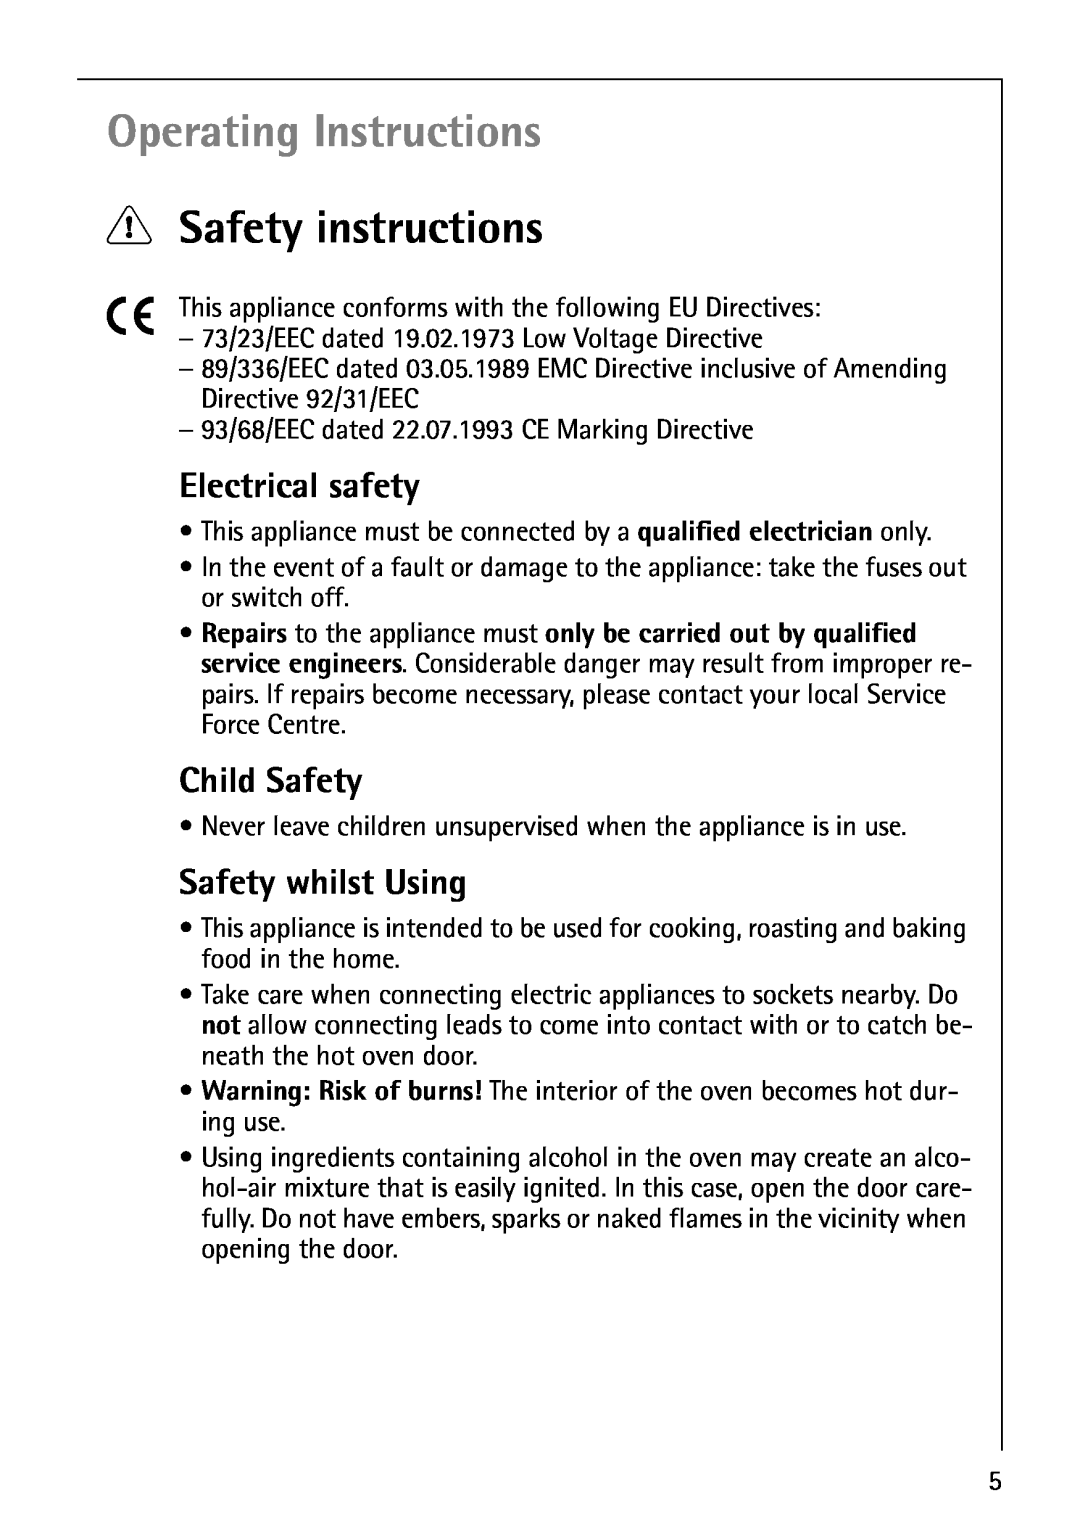 Electrolux B5741-4 manual Operating Instructions, Safety instructions, Electrical safety, Child Safety, Safety whilst Using 